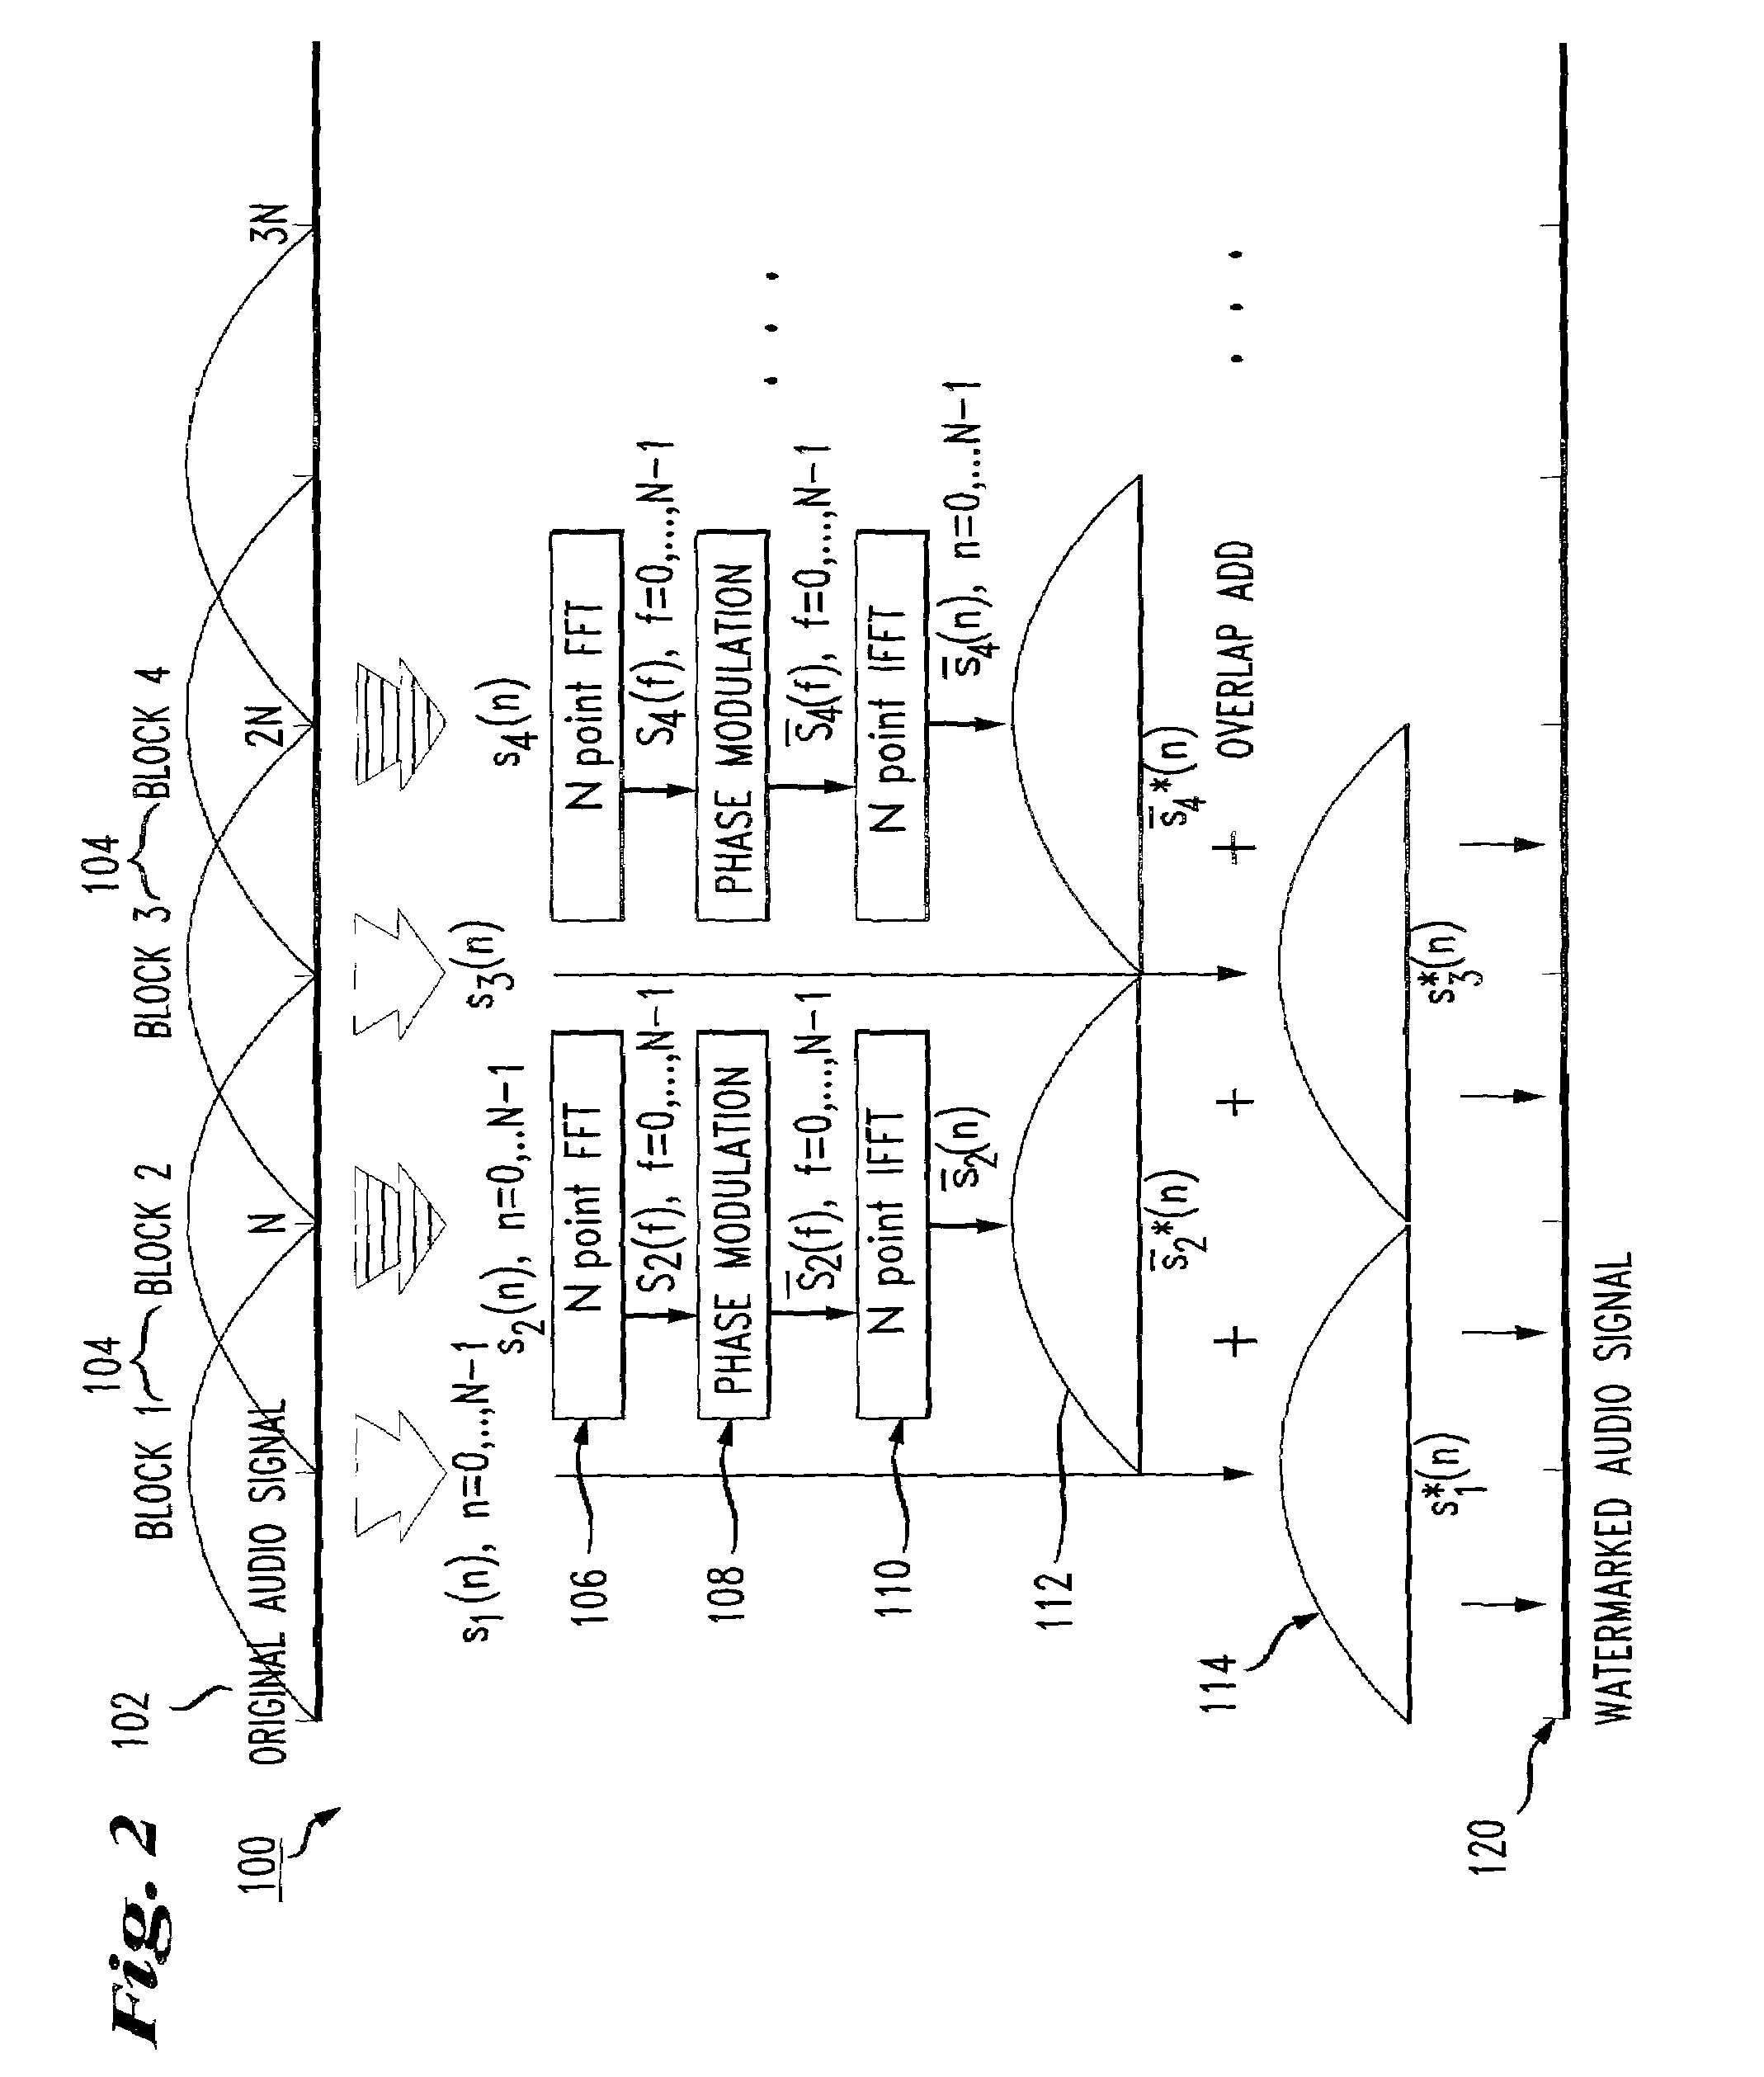 System and method of watermarking signal